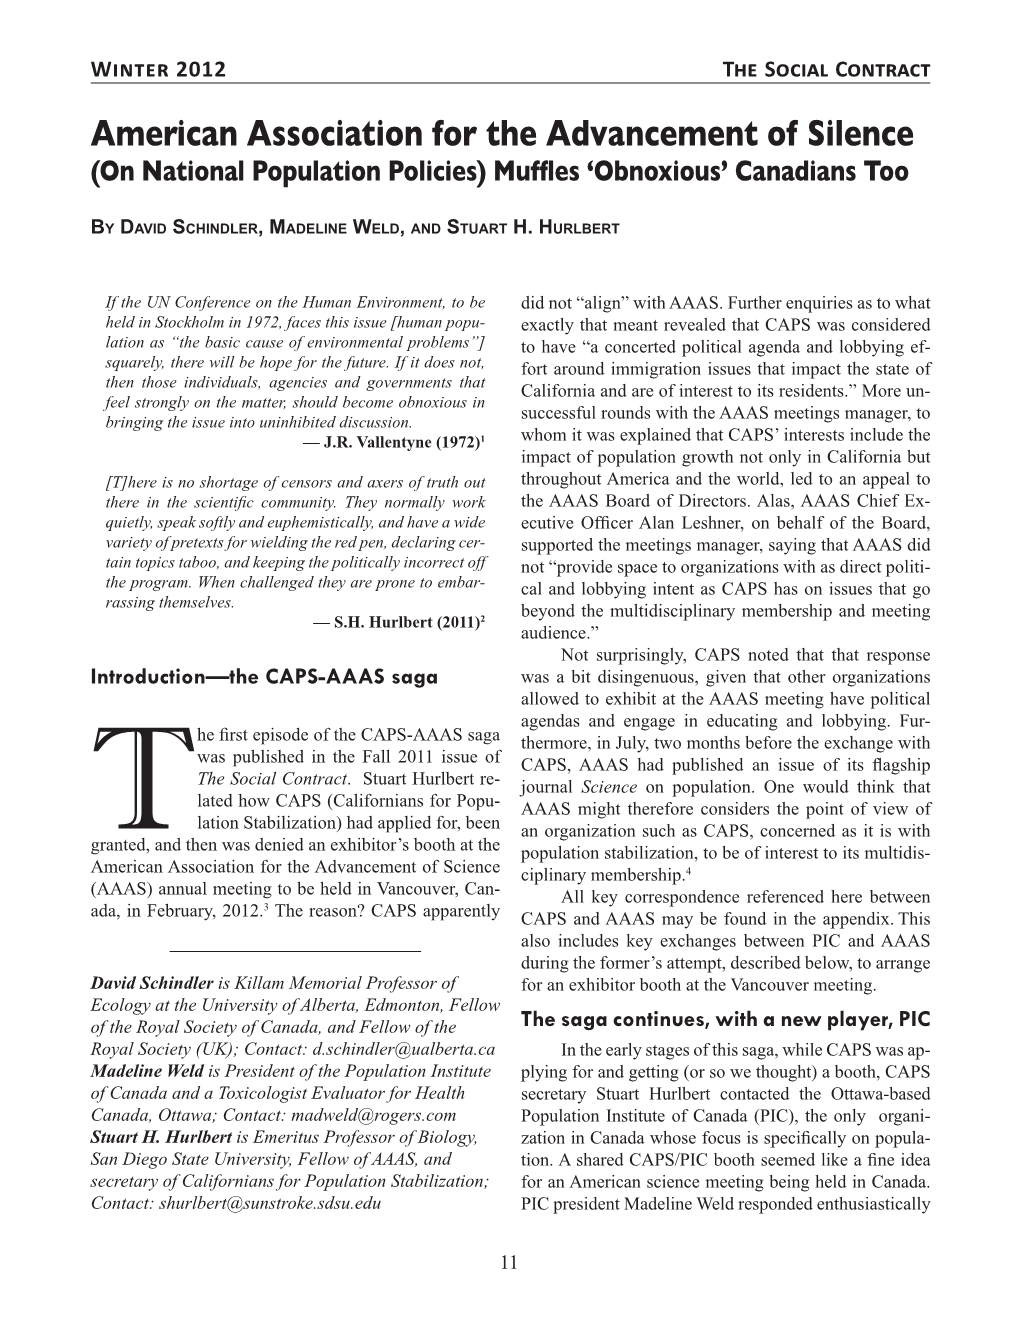 American Association for the Advancement of Silence (On National Population Policies) Muffles ‘Obnoxious’ Canadians Too